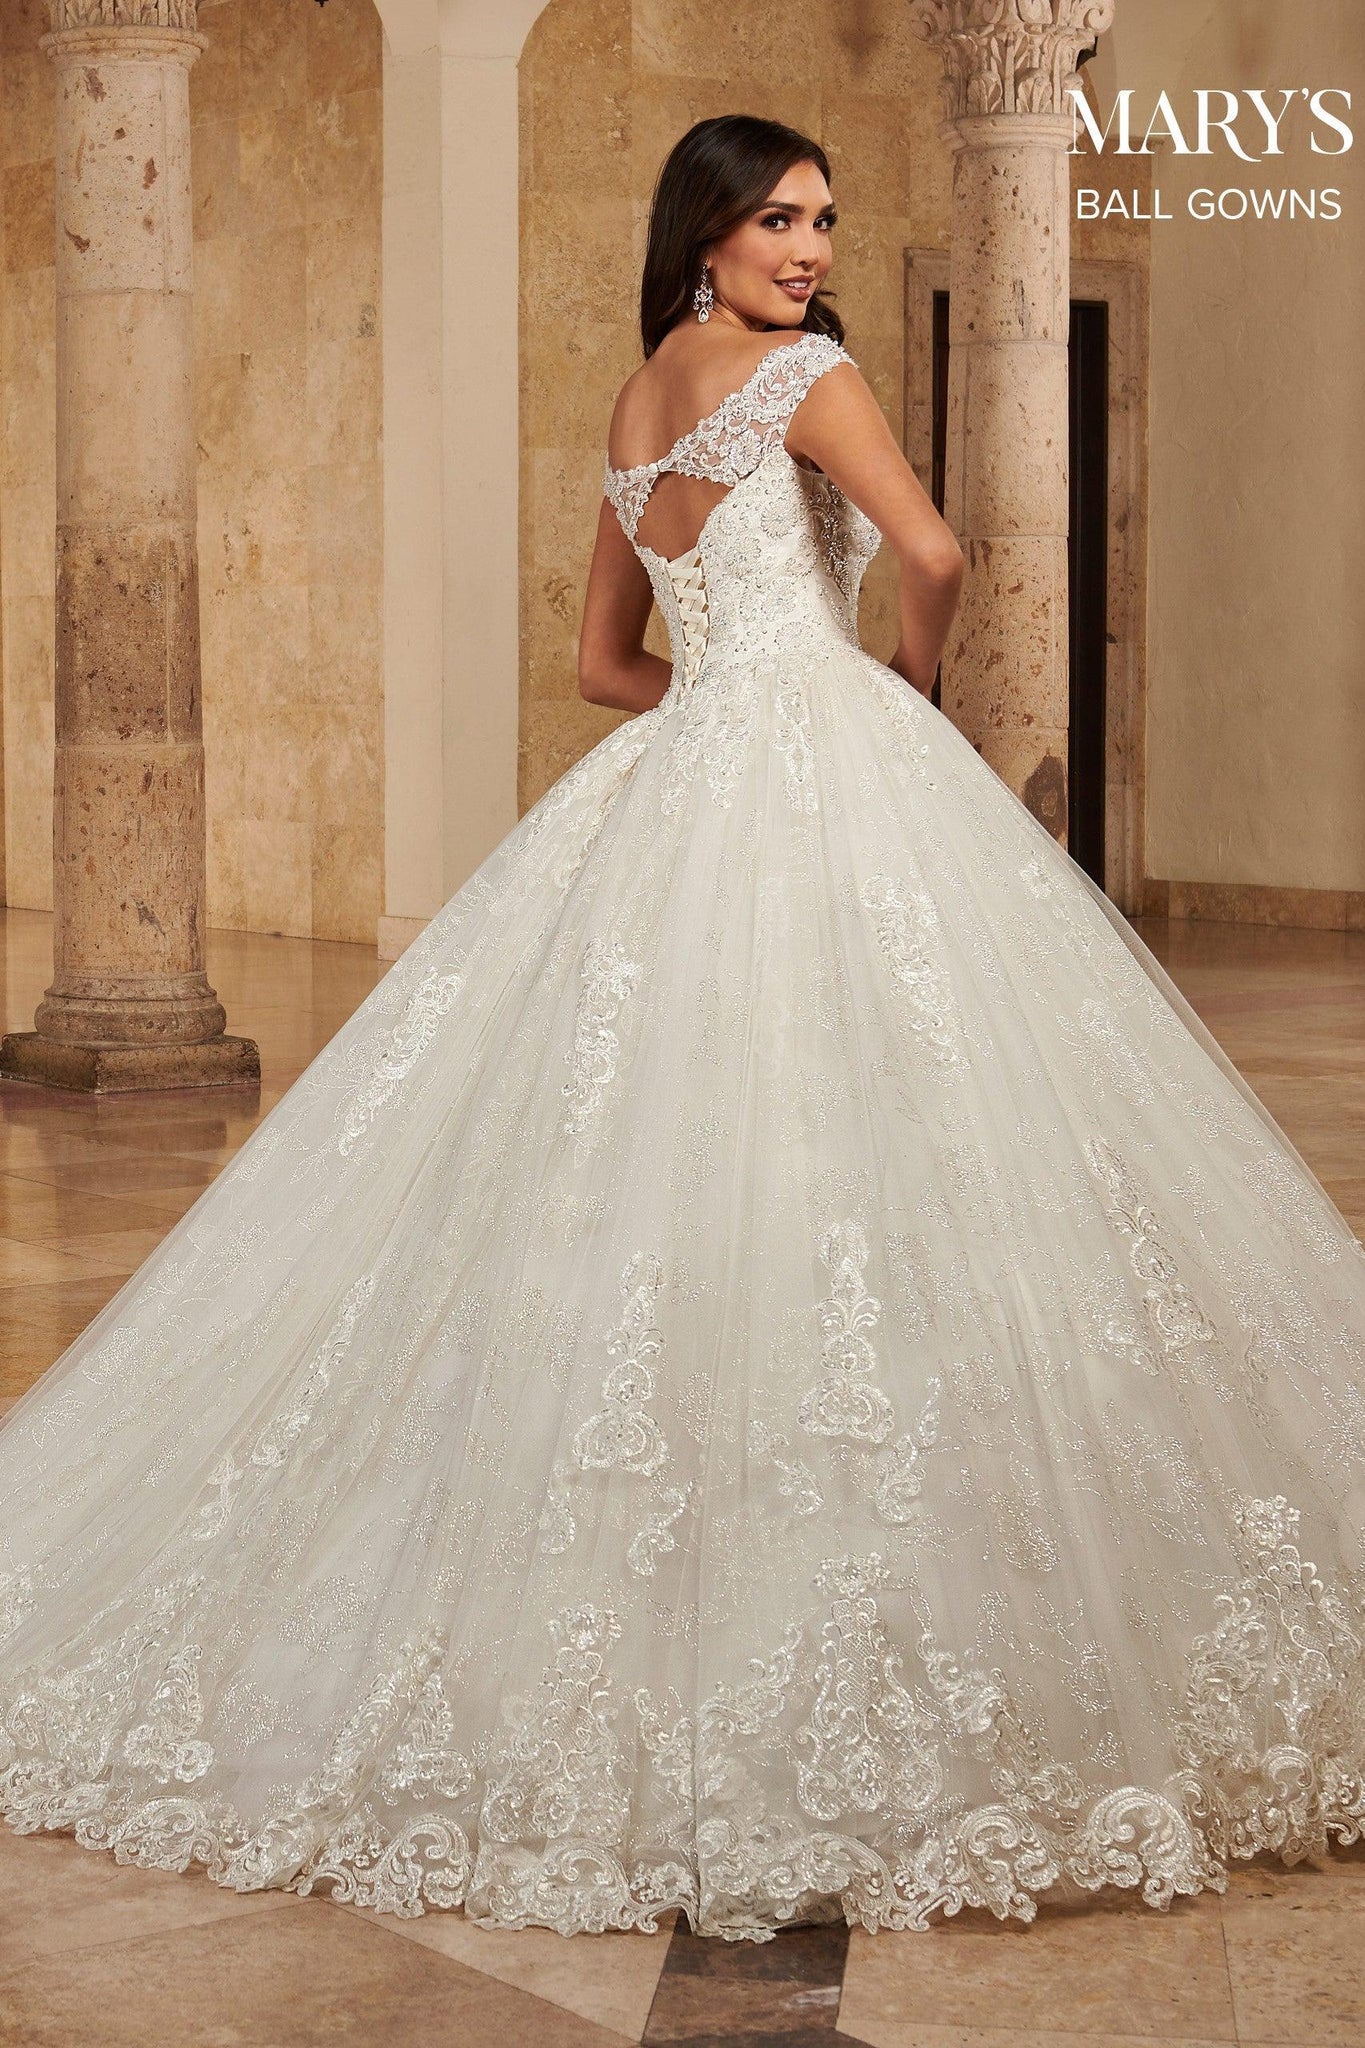 MARY'S BRIDAL - Jaqueline - Adore Bridal and Occasion Wear